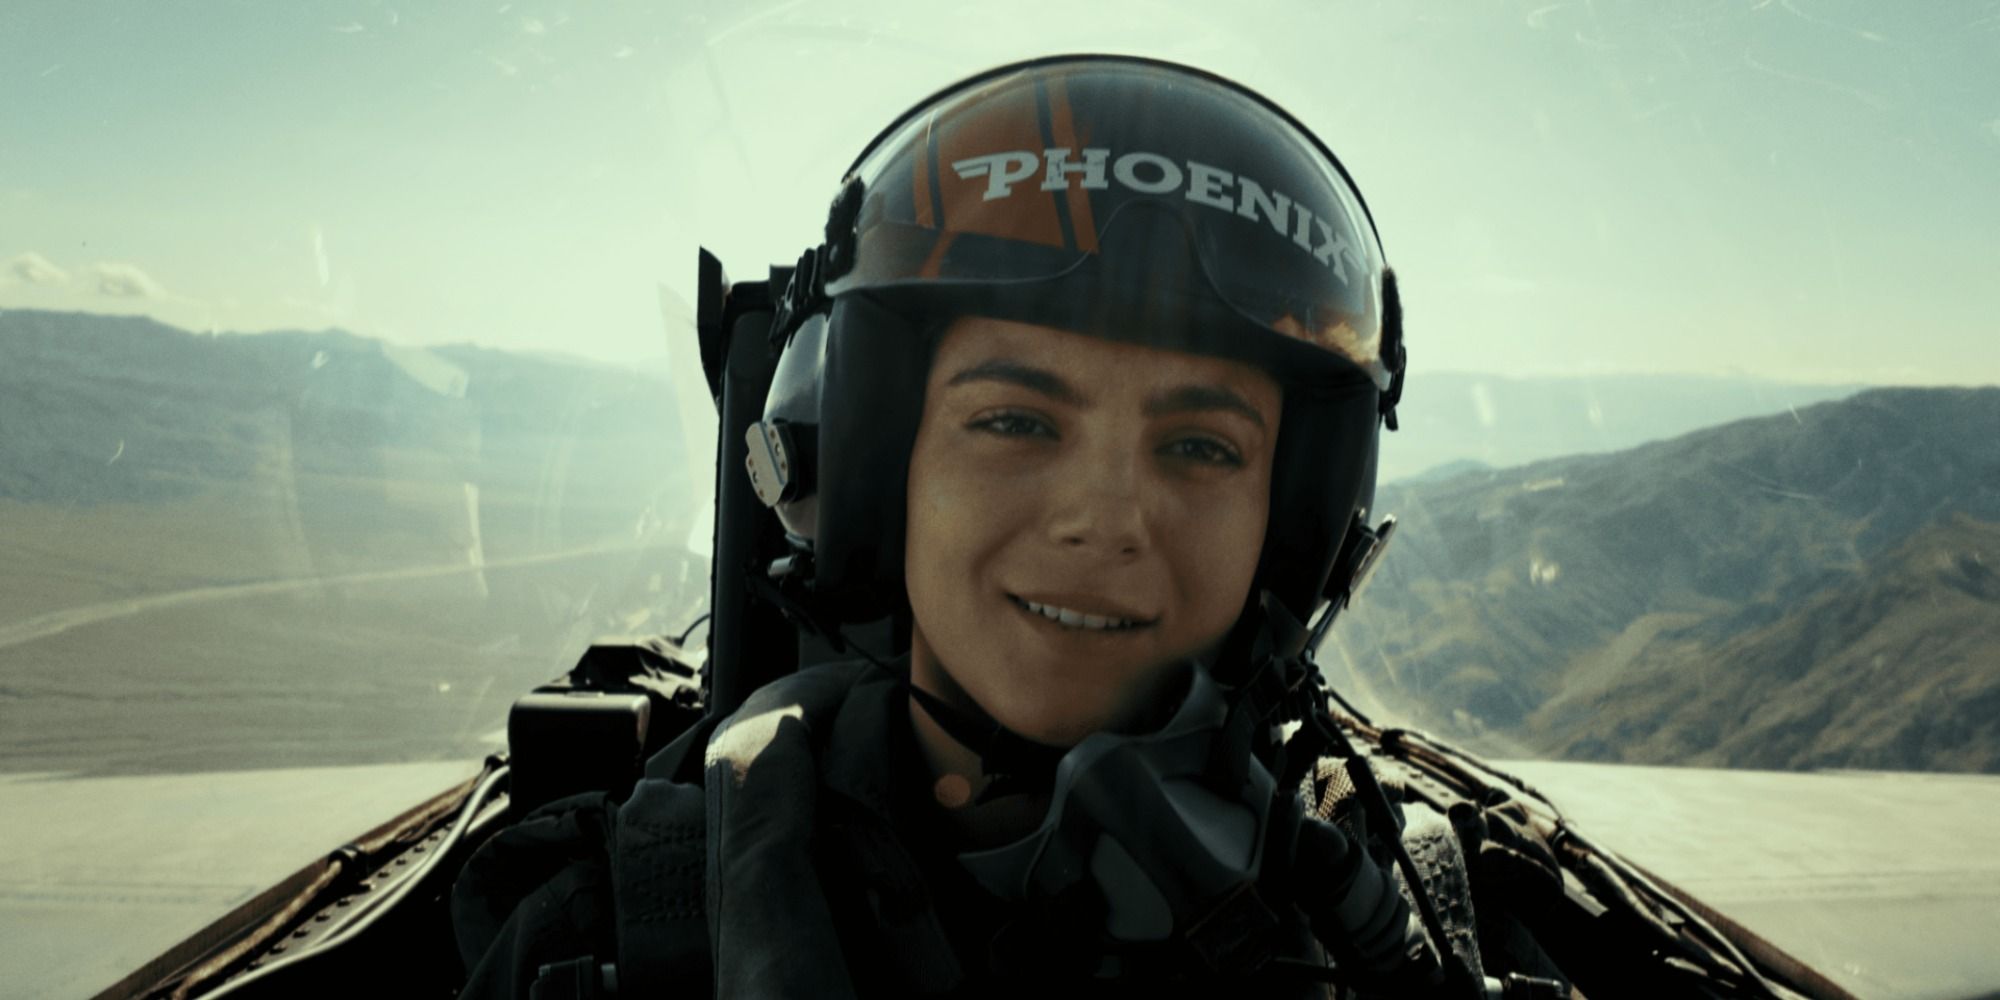 Monica Barbaro flying as a phoenix in the cockpit